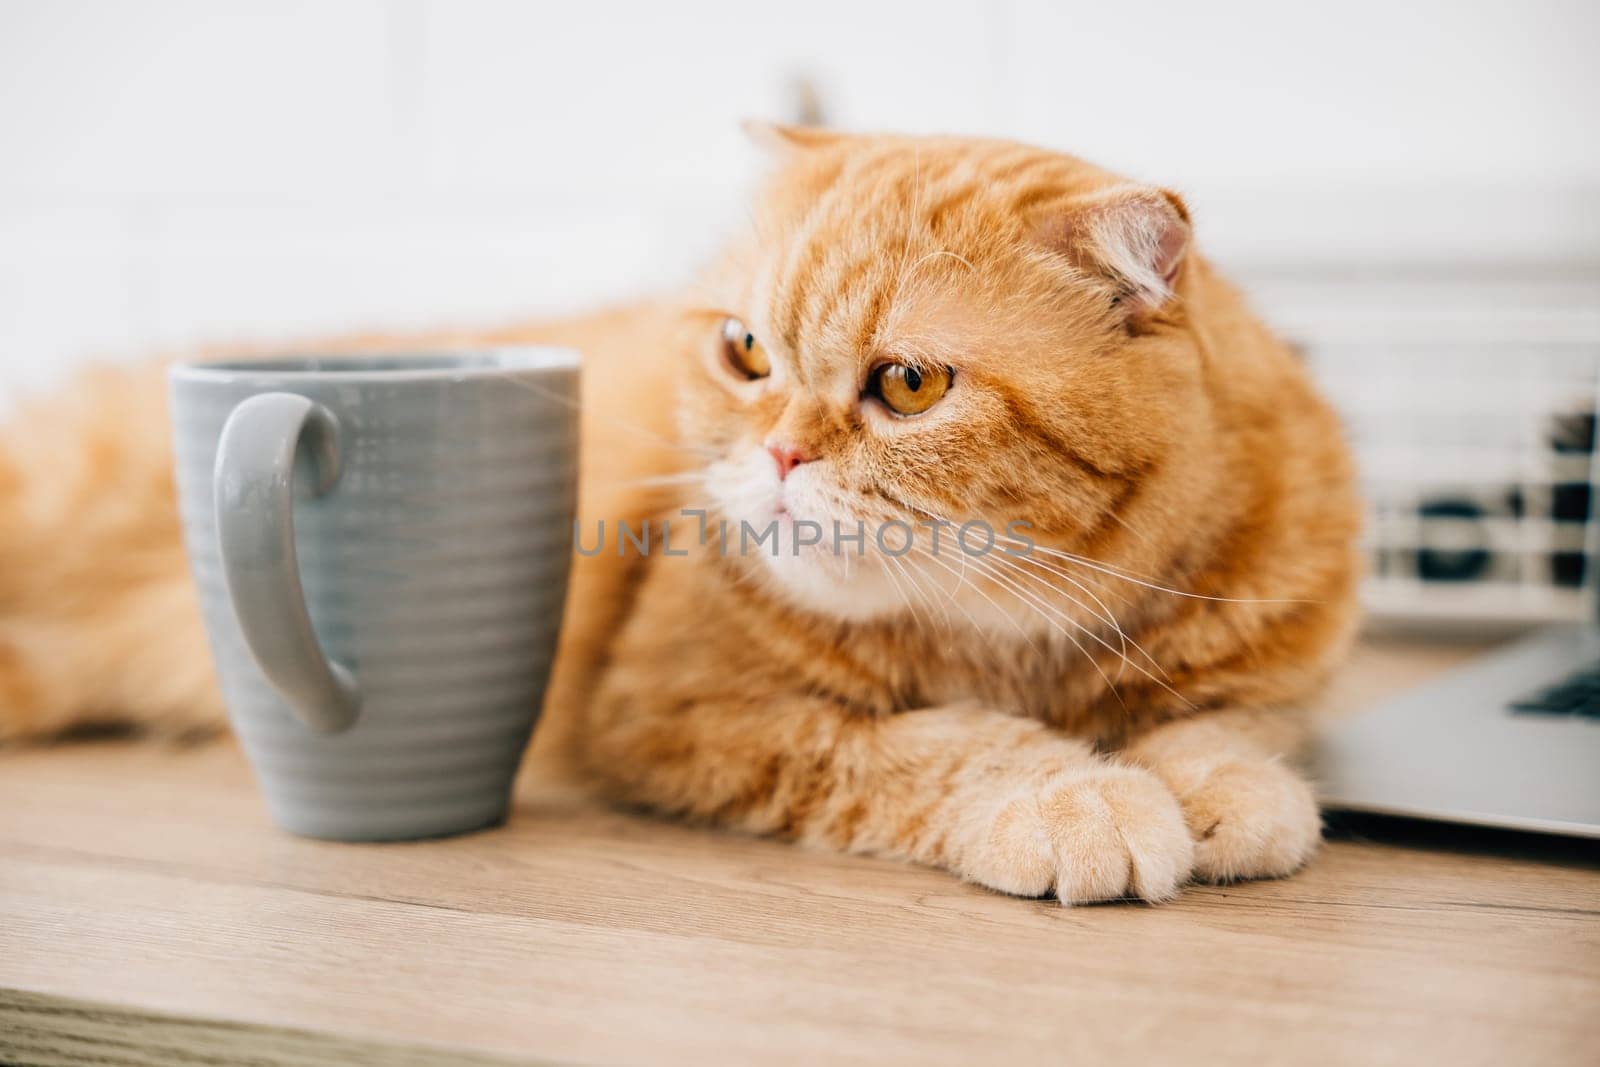 Scottish Fold cat, cute and furry, sits on a table by a coffee cup, croissant, and business documents on a wooden desk. Window view is bright in the morning